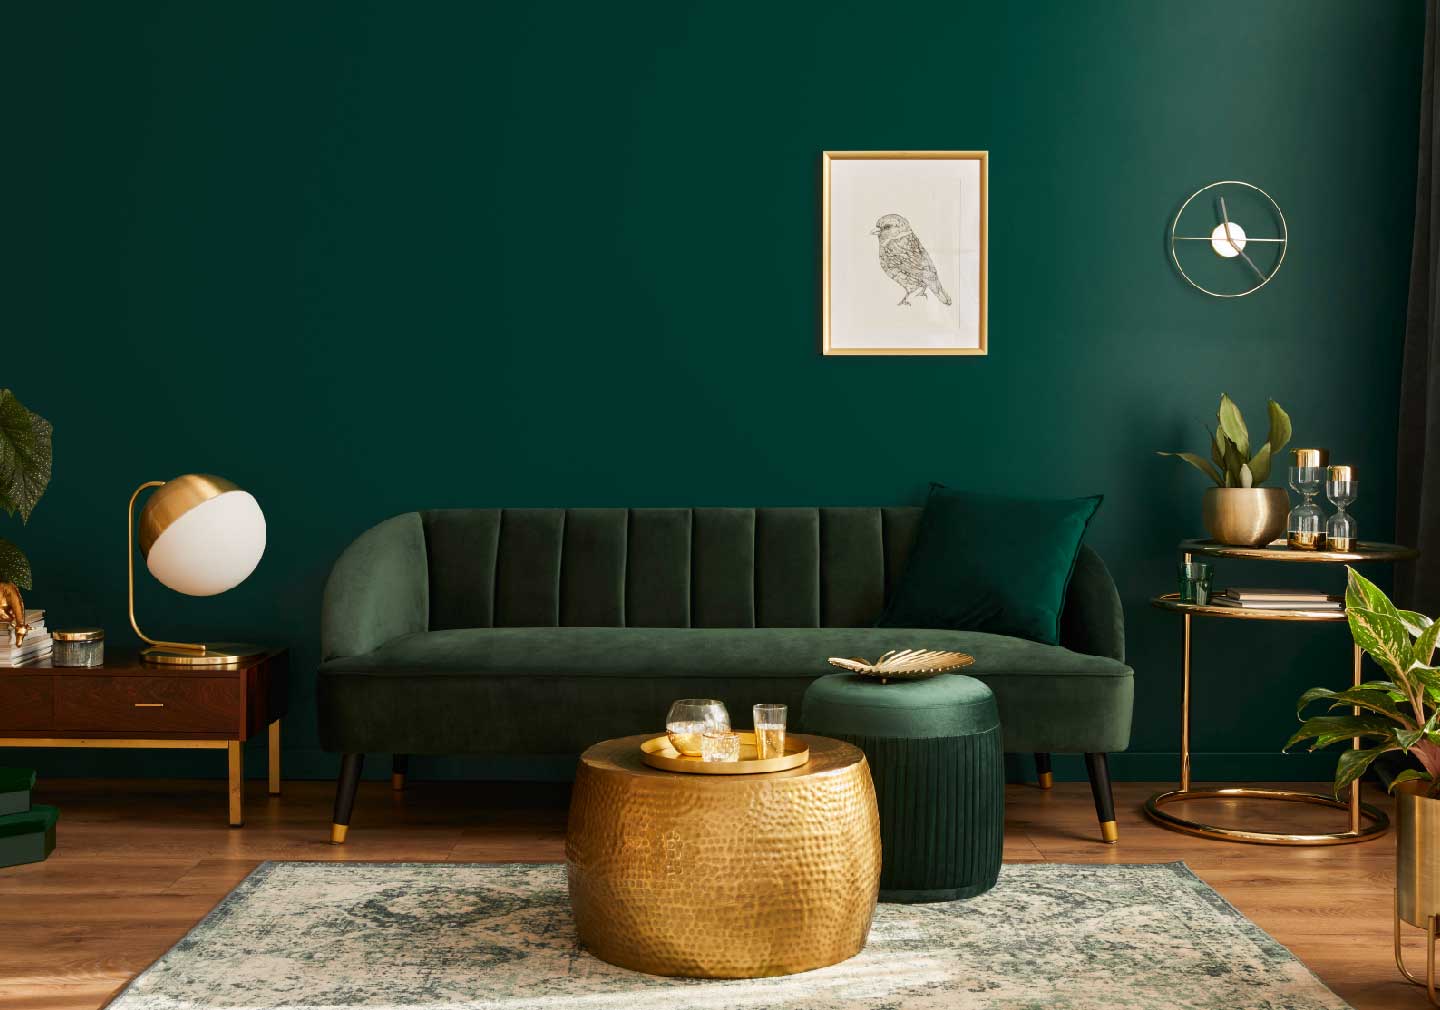 multitasking coffee table with green sofa and green base wall with a photo frame on it.